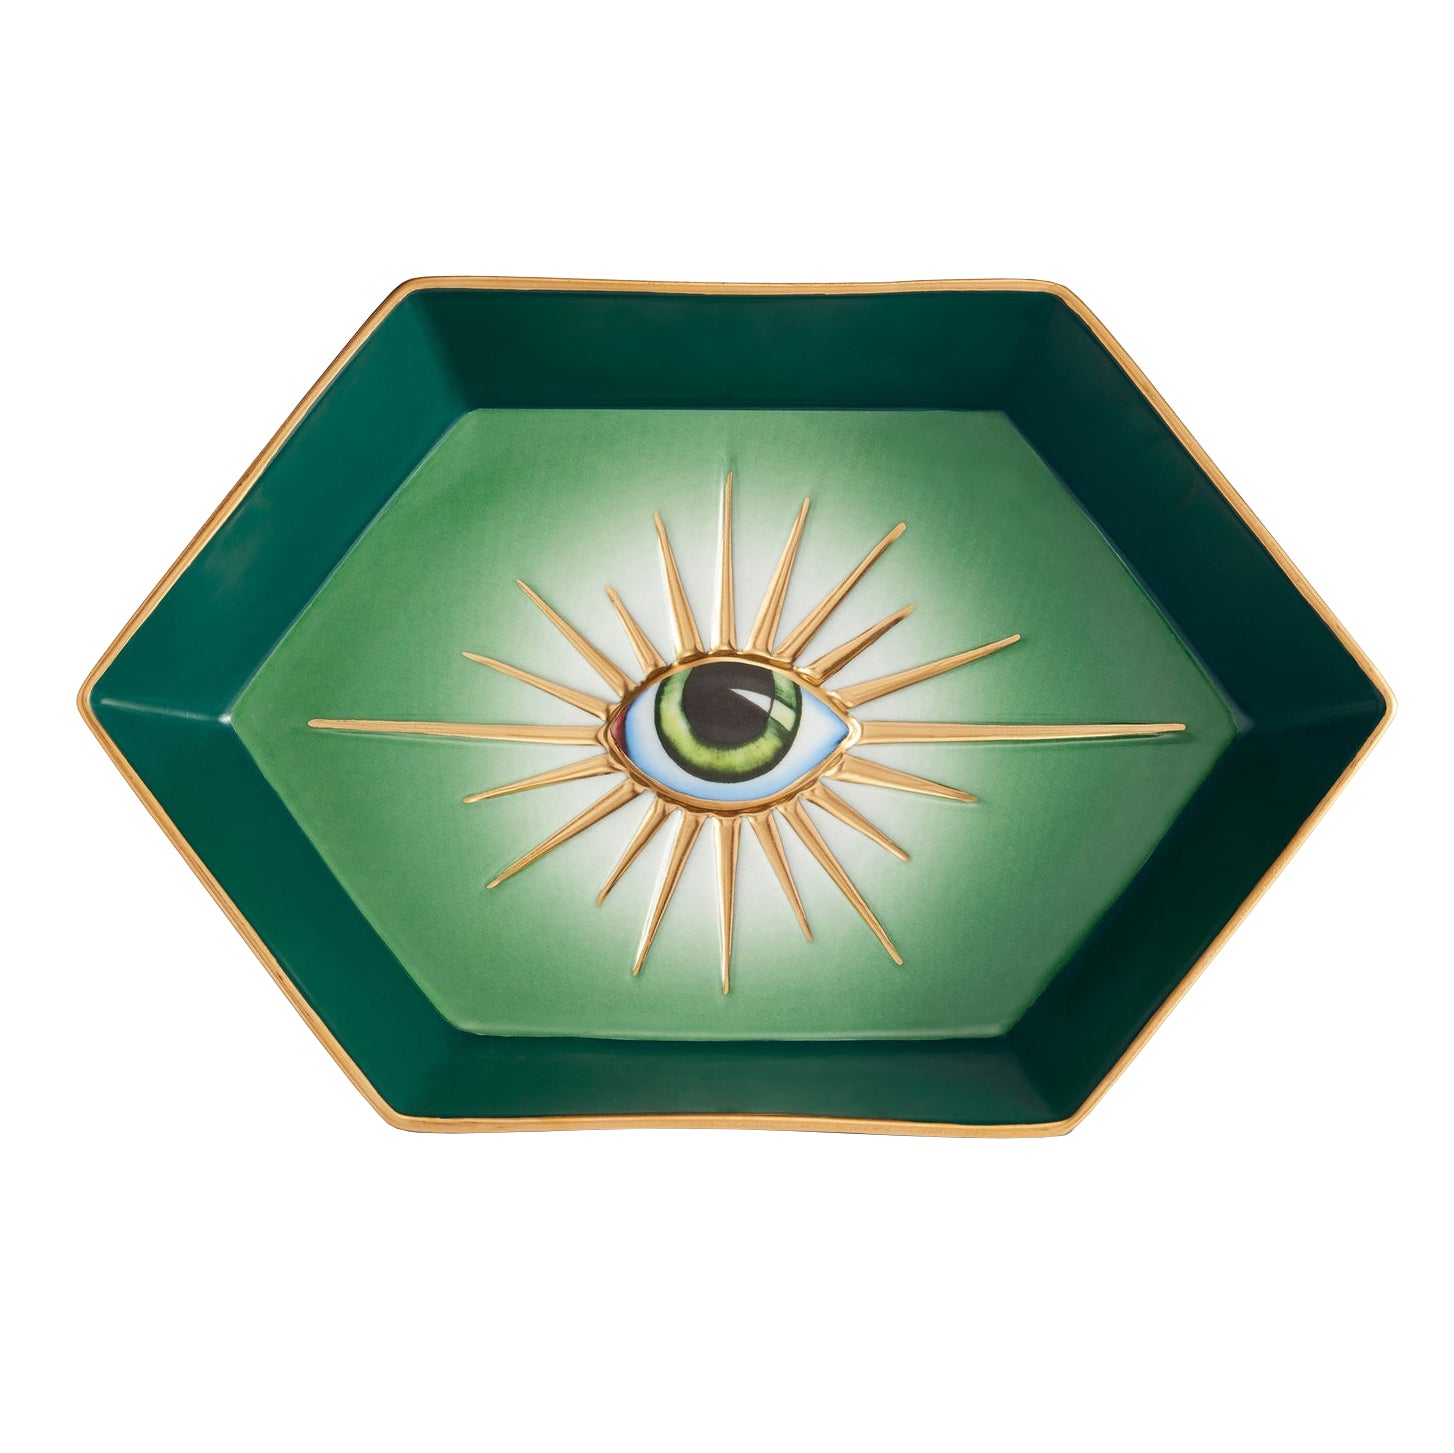 CONTEMPORARY GREEN PORCELAIN VIDE POCHE WITH EYE